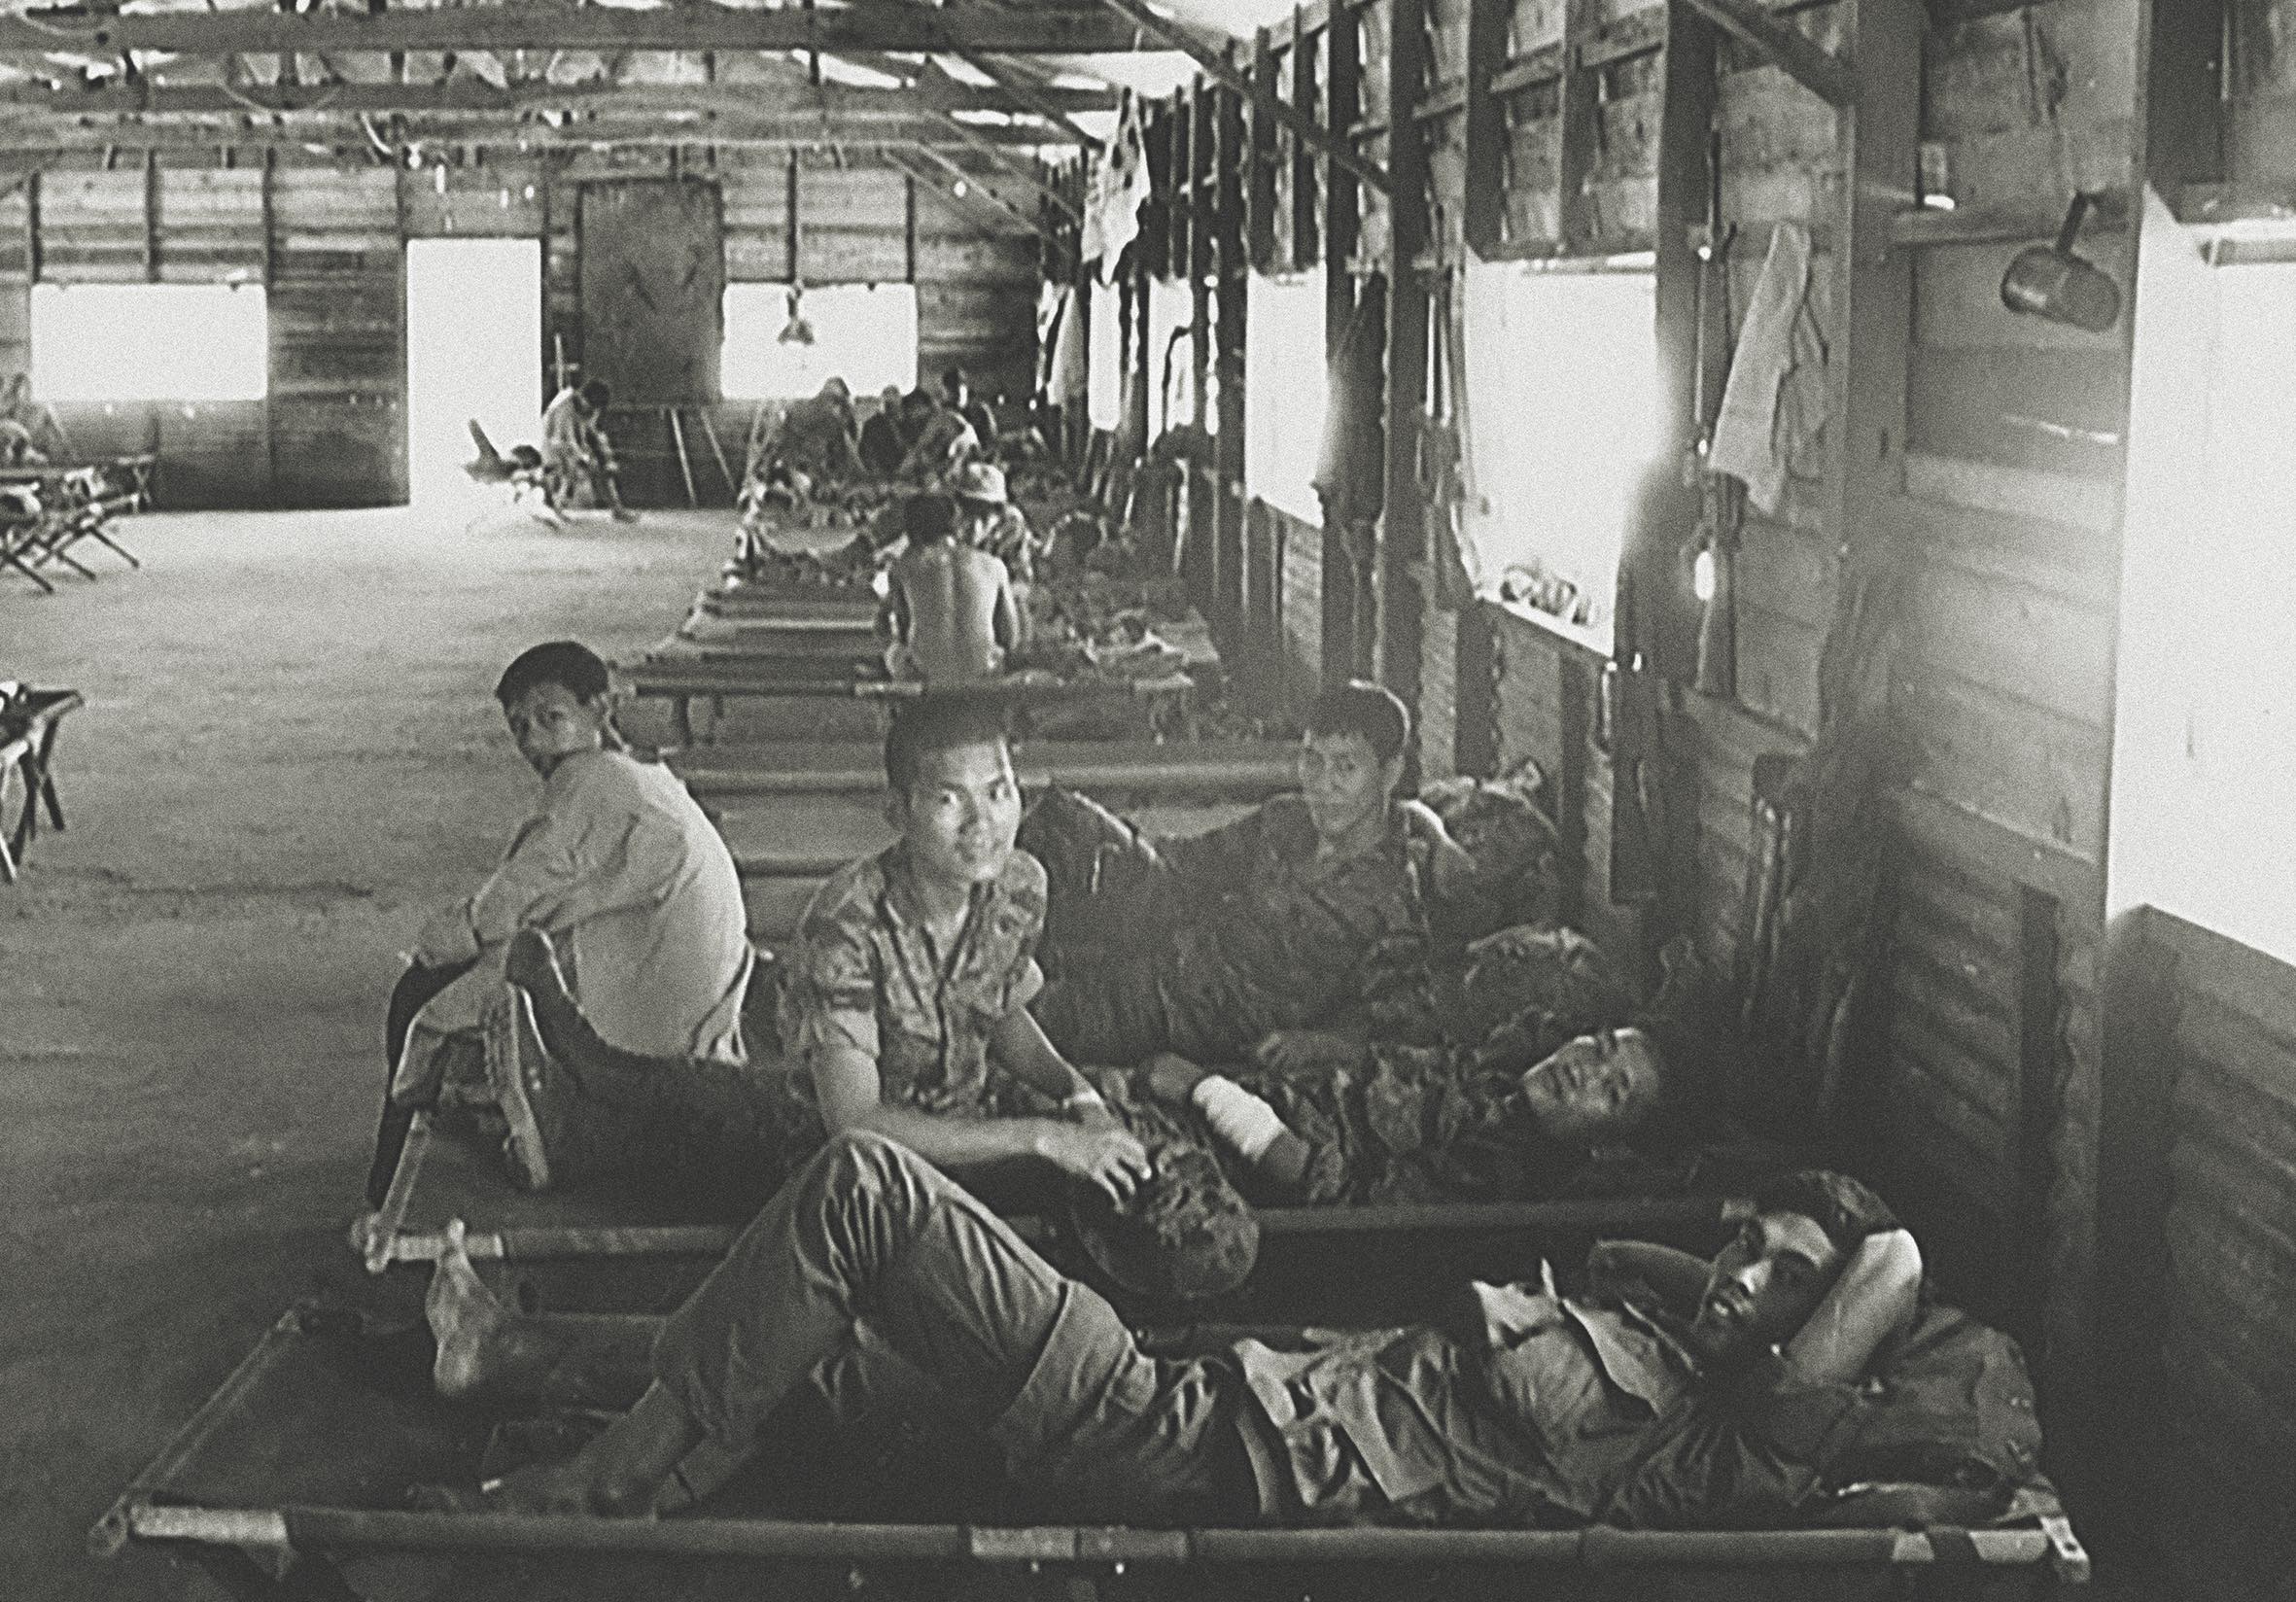 Nung soldiers, South Vietnamese of Chinese descent, who fought at Ngok Tavak in the 11th Mobile Strike Force Company, receive treatment for their wounds after being evacuated. / AWM P11058.003